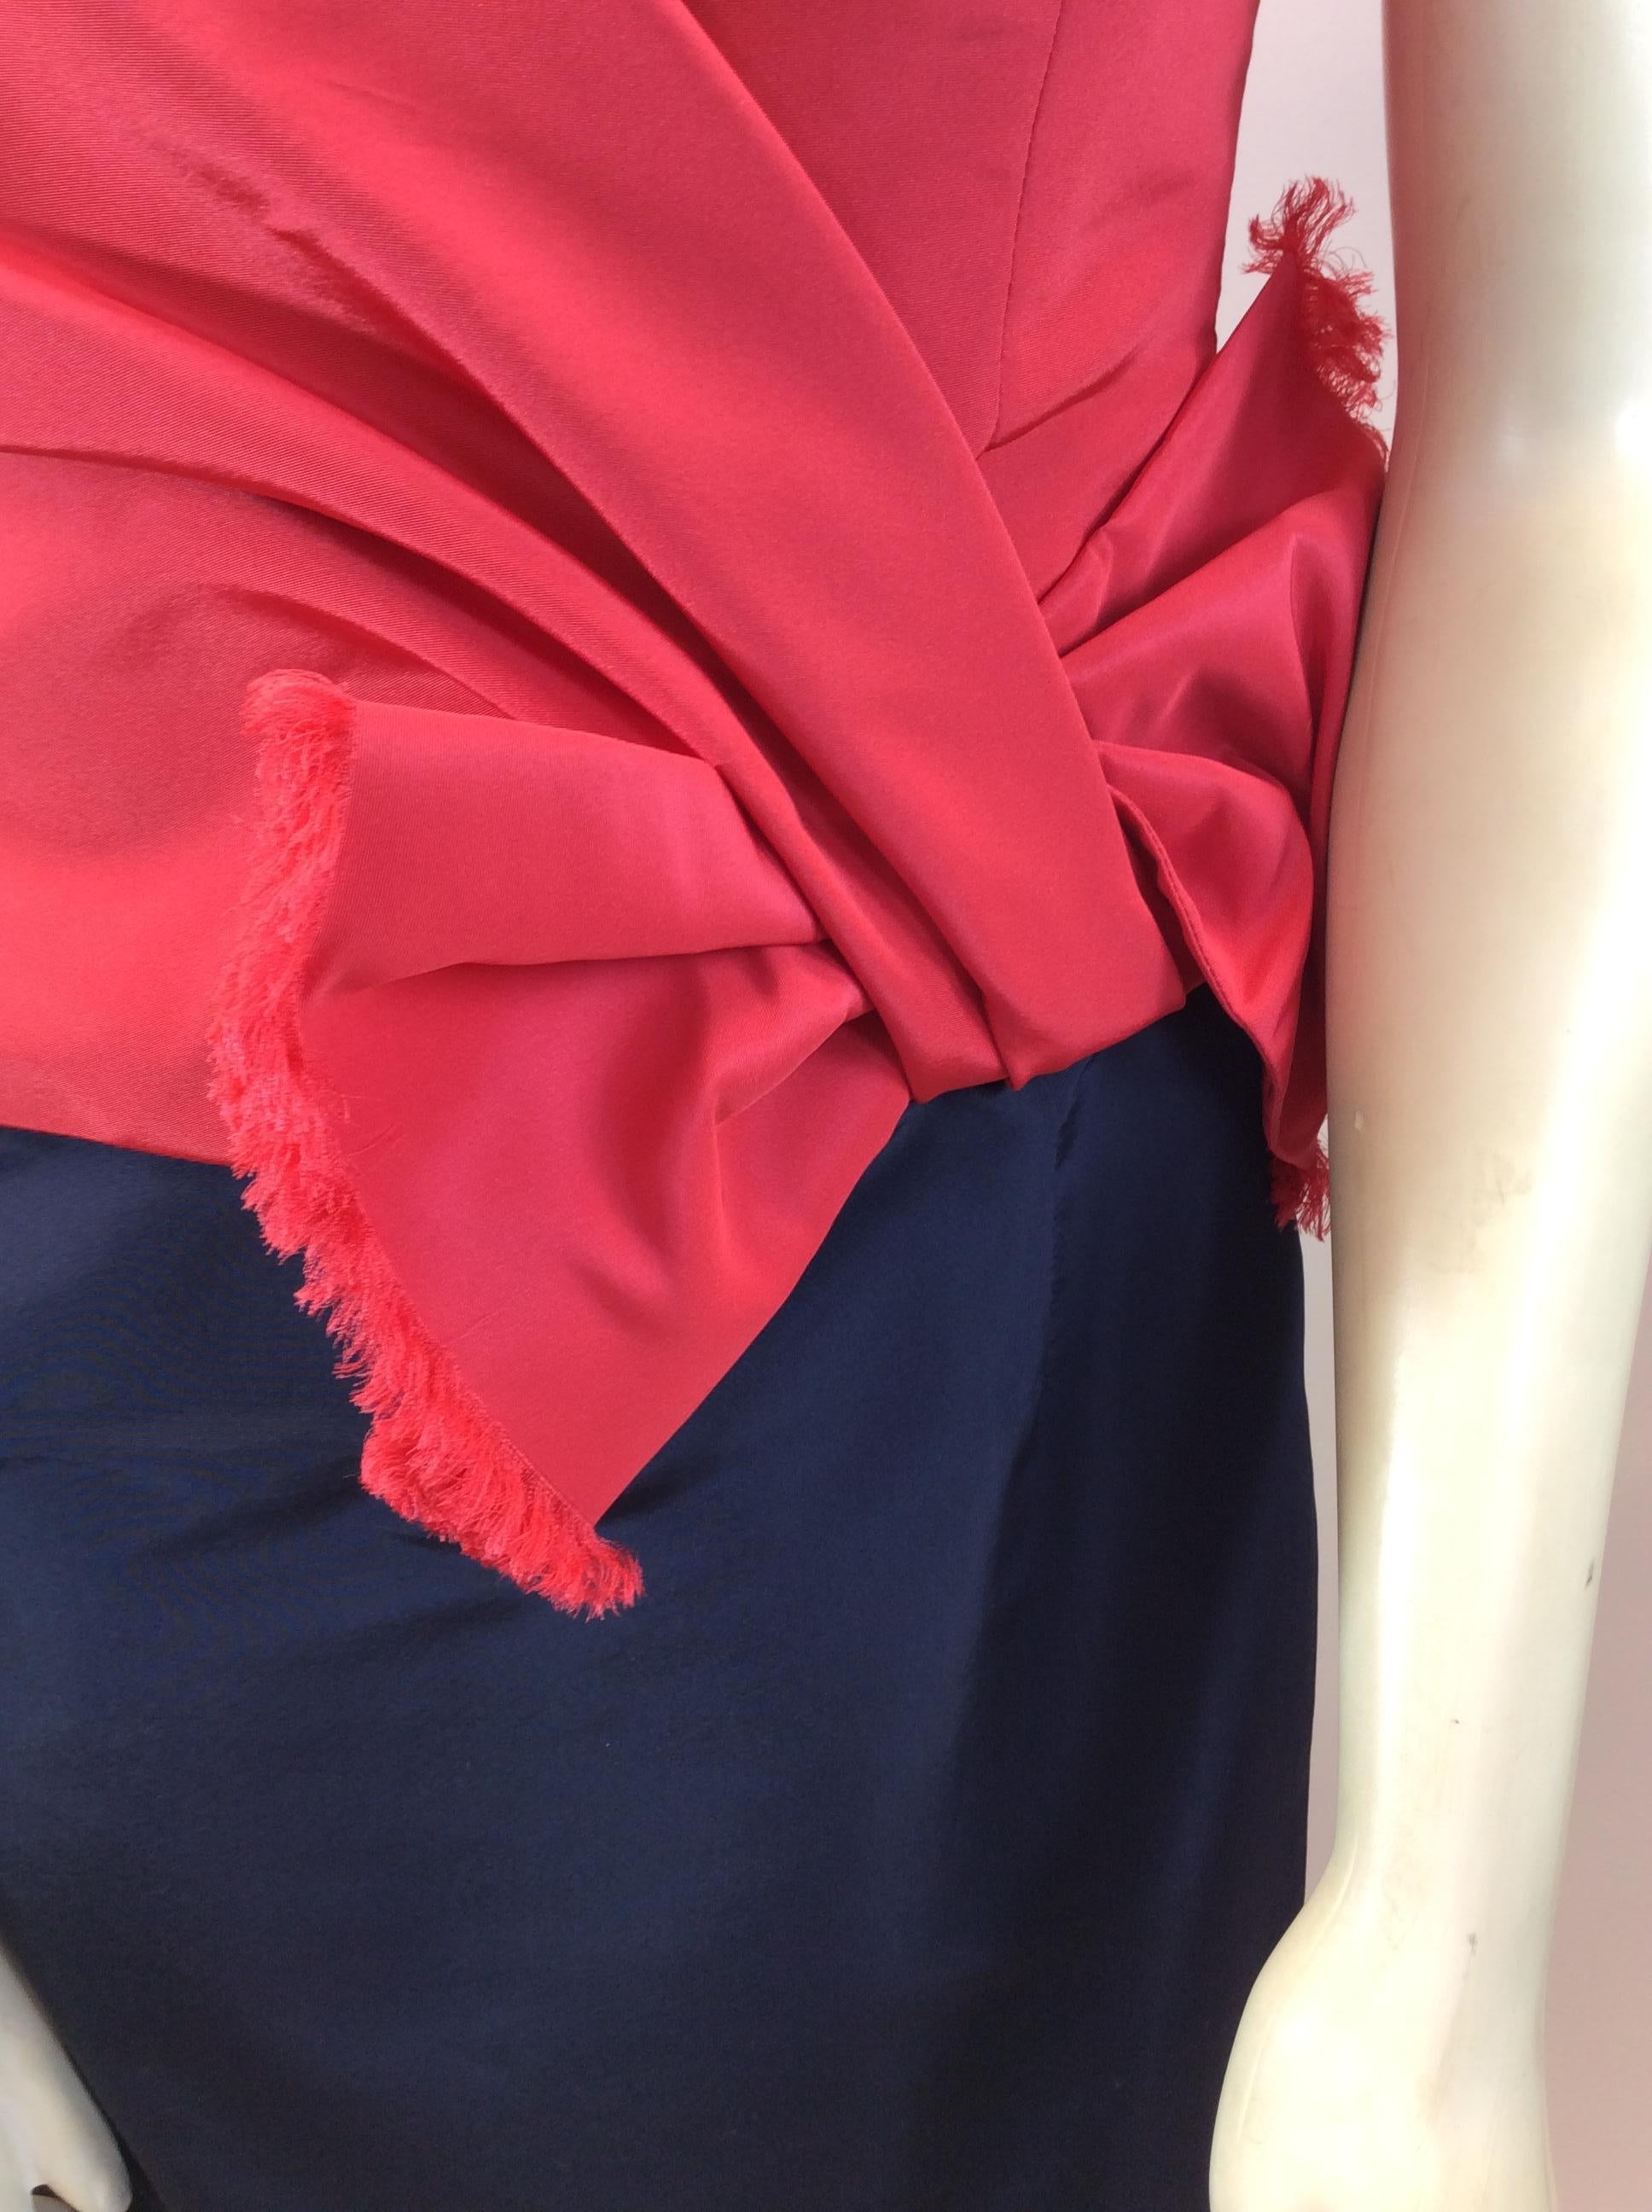 Carolina Herrera Red and Navy Blue Formal Gown For Sale 1